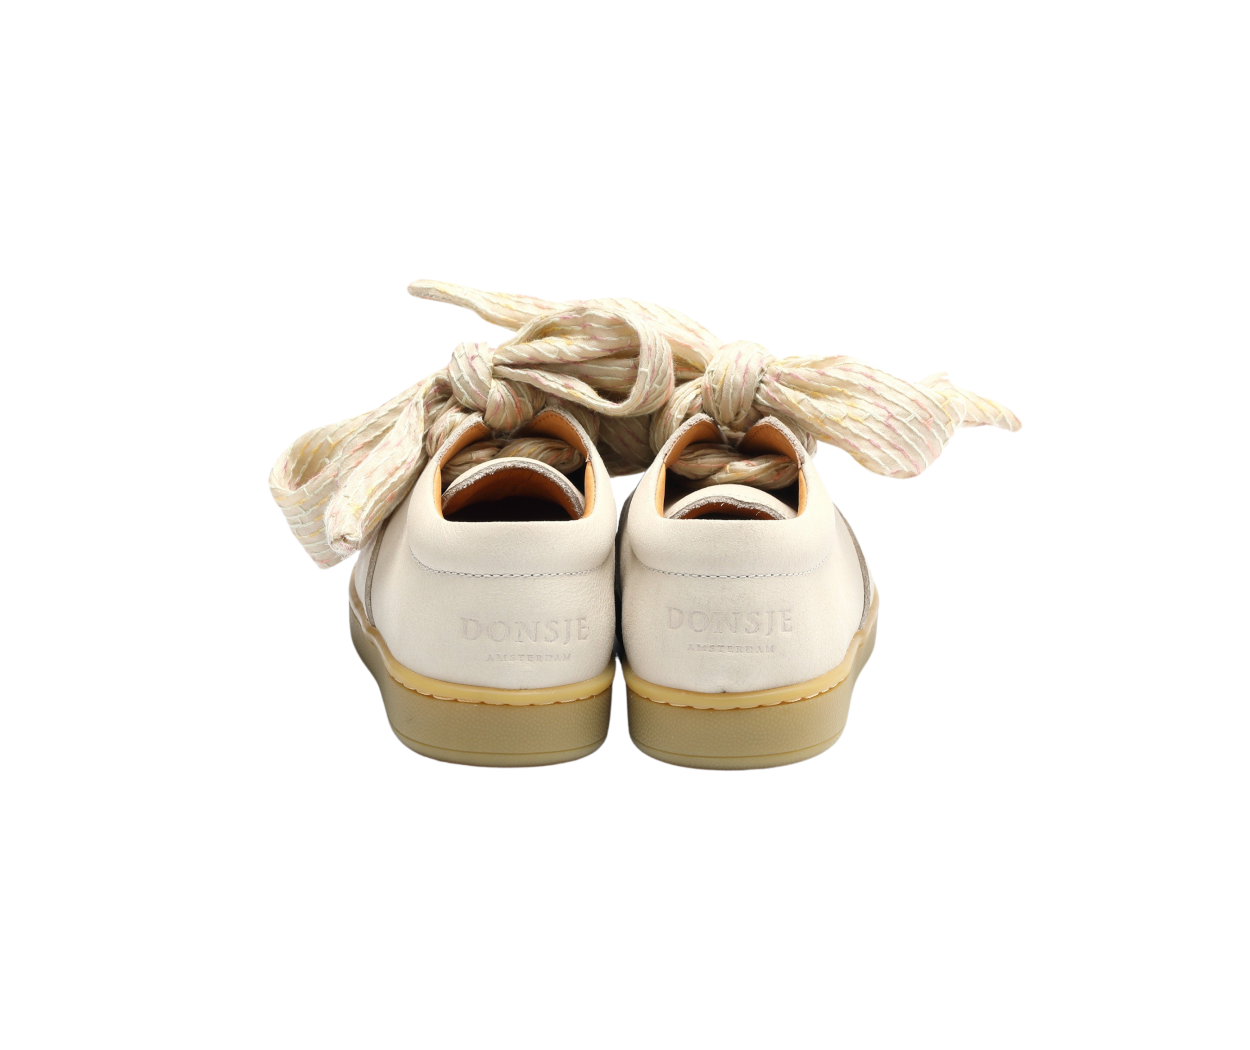 Meilly Sneakers | Cream Leather